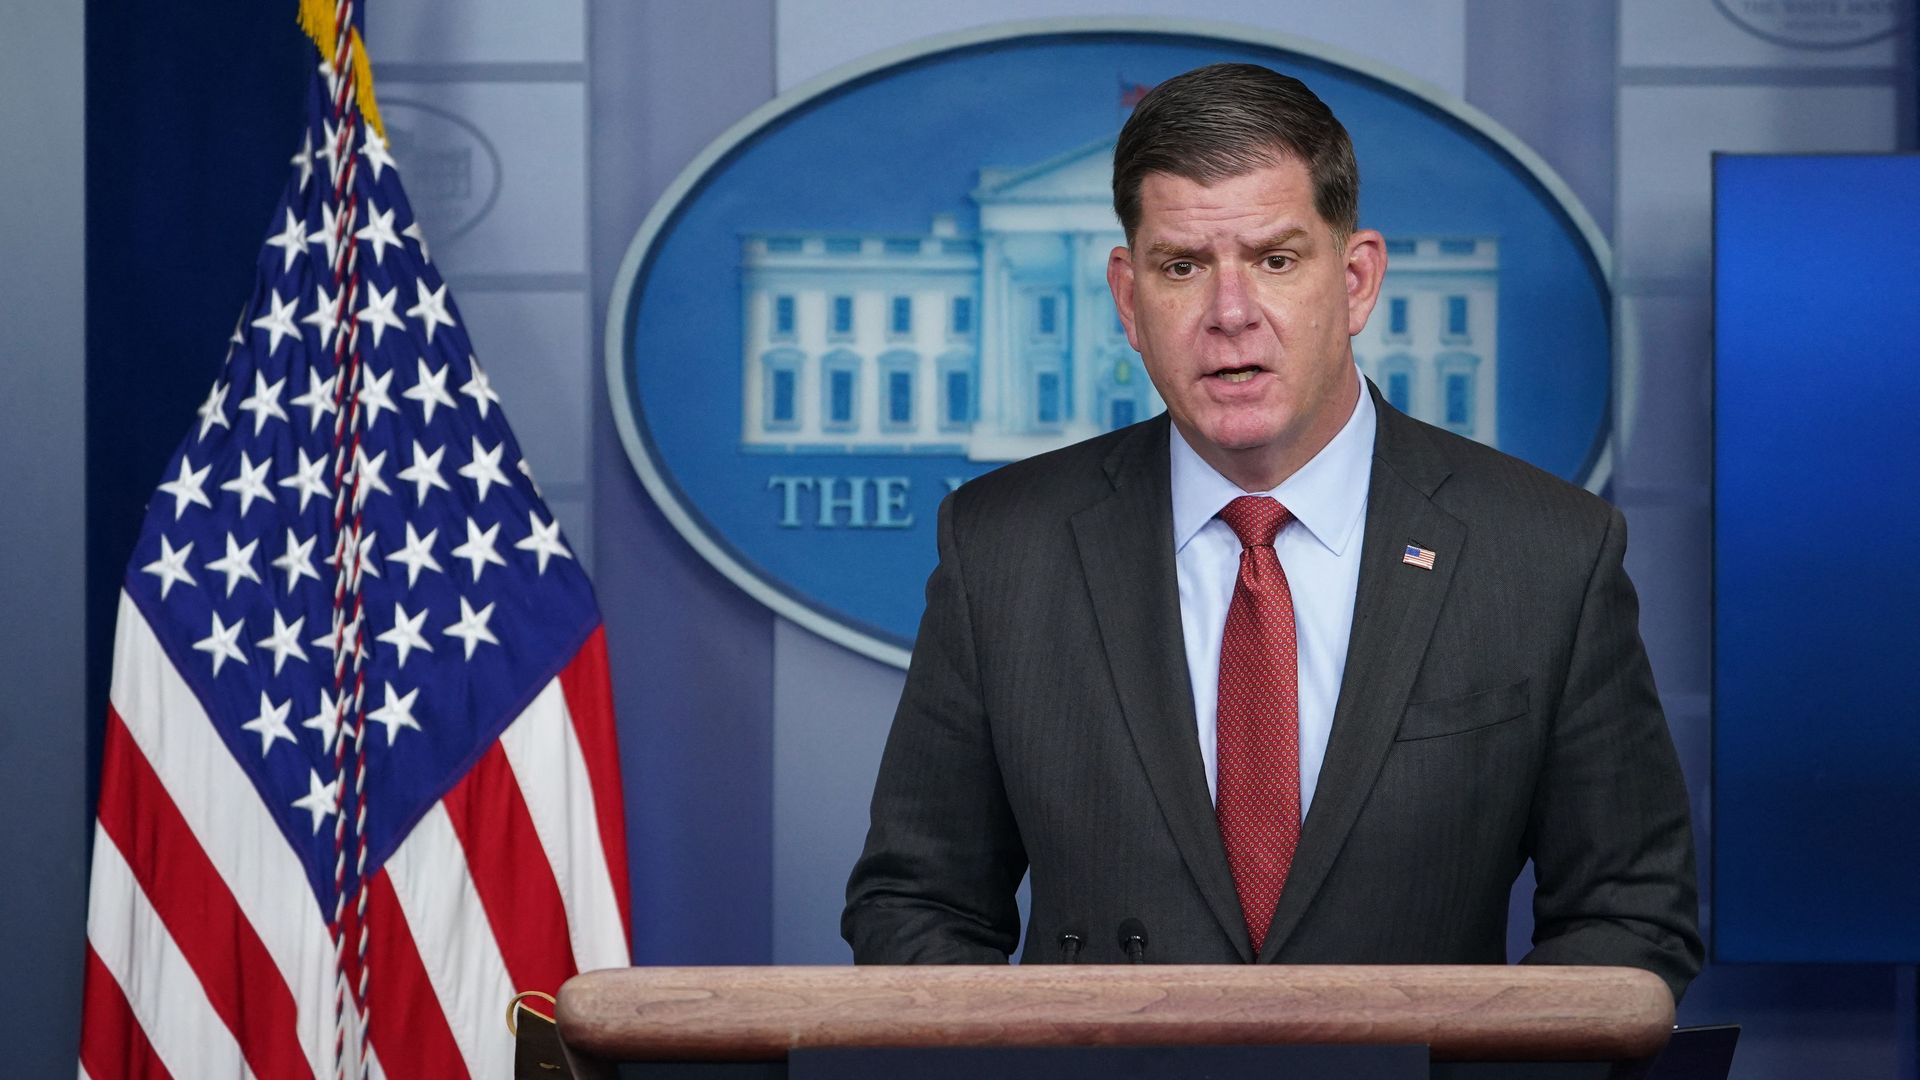 Marty Walsh stands behind the White House podium. 